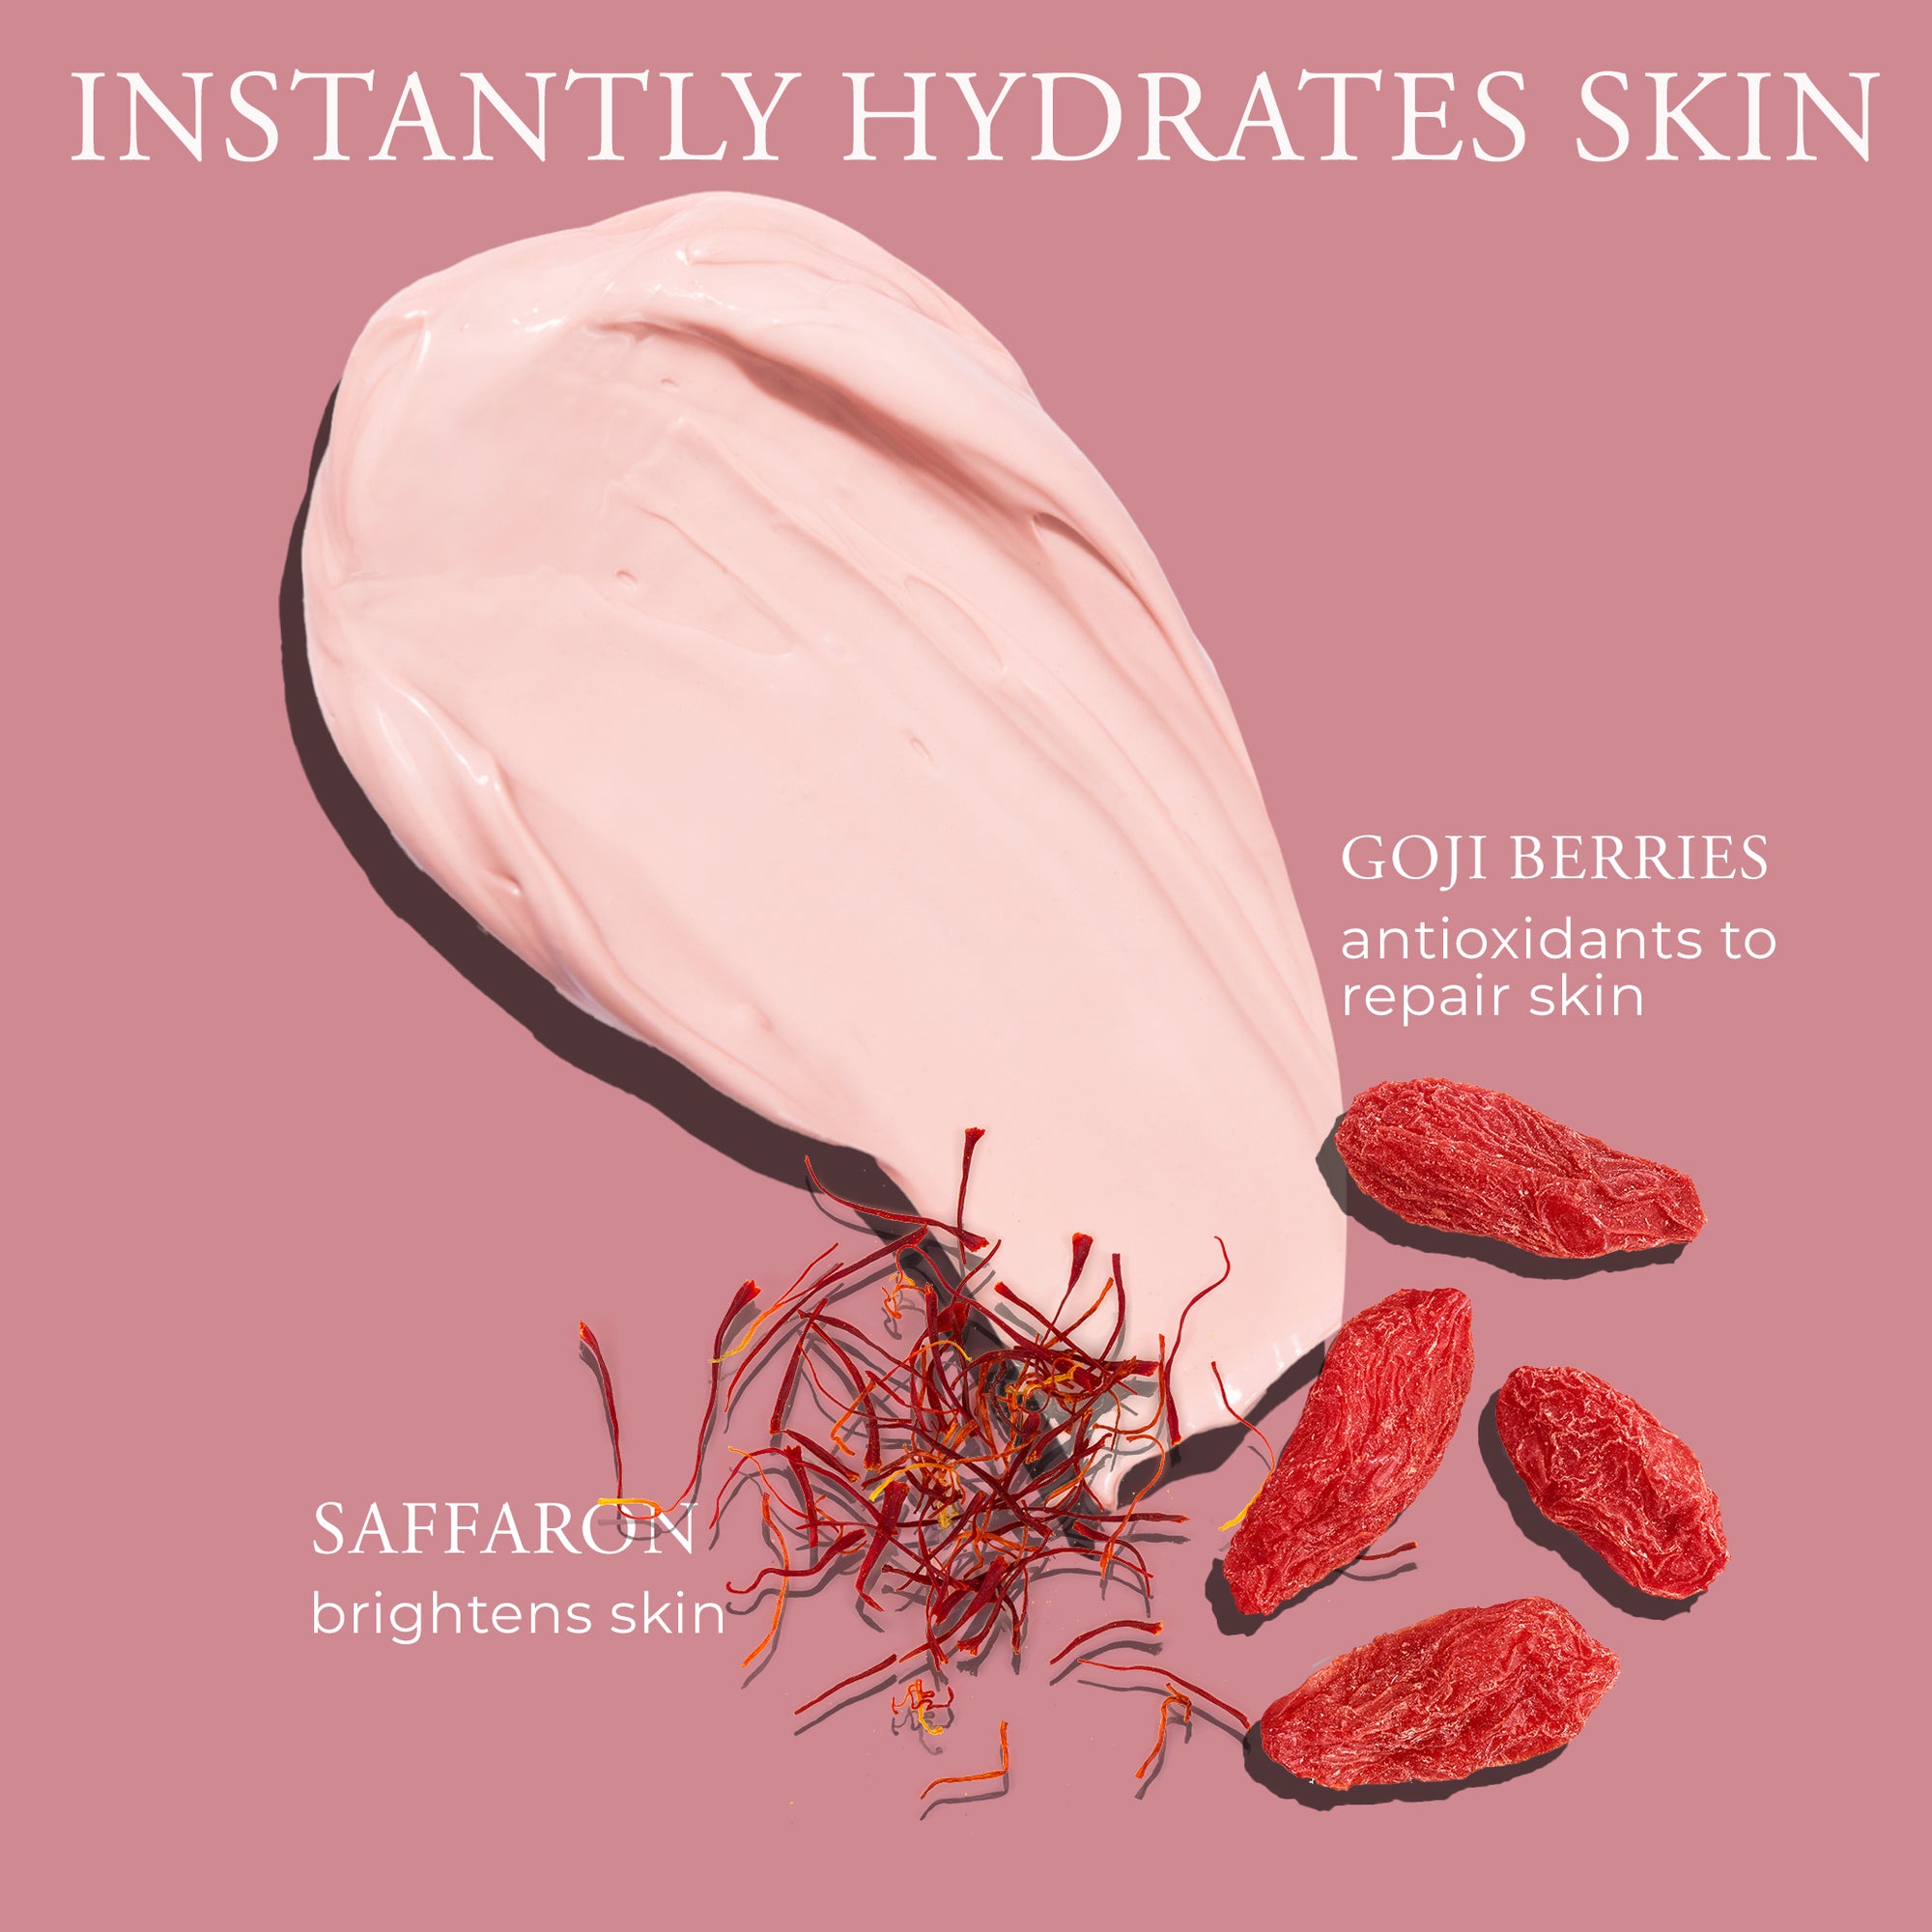 Hydrating Rose Facial Mask the brightens and repairs skin